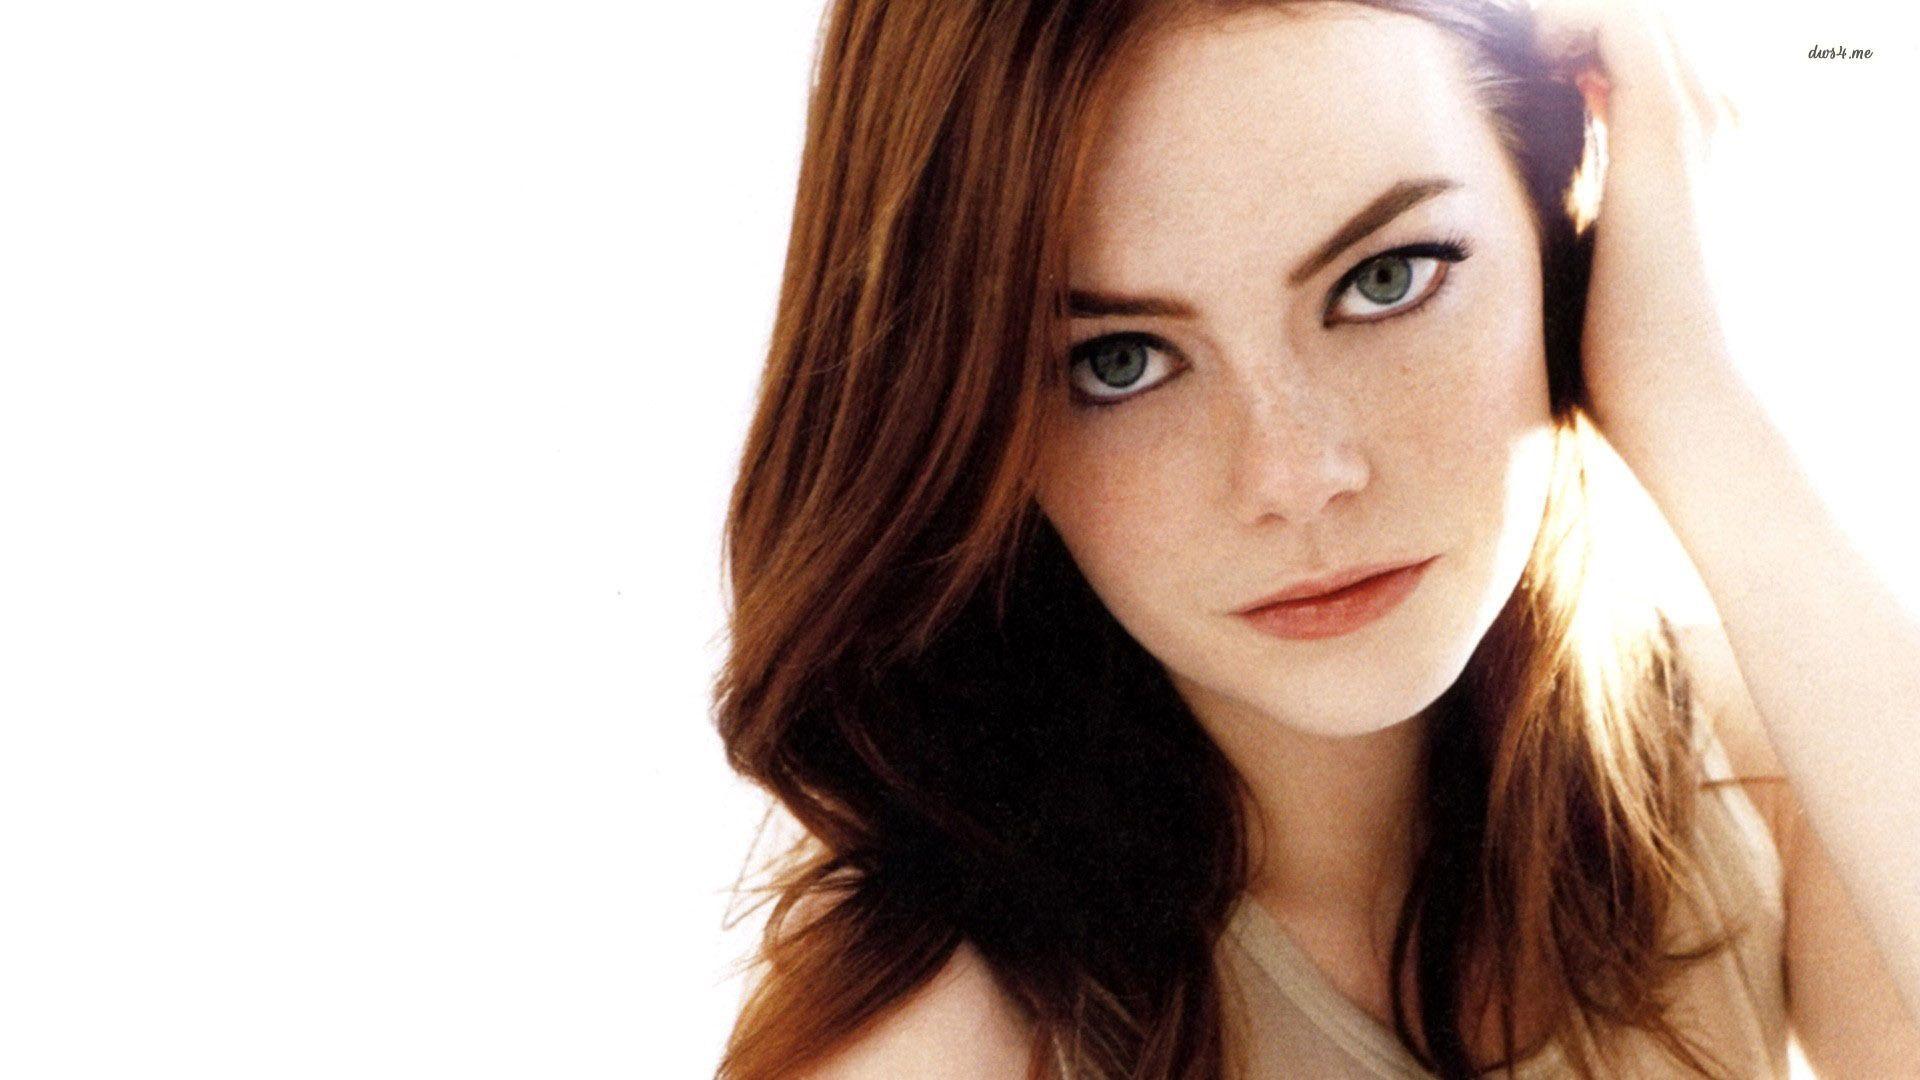 Emma Stone HD Wallpaper For Android Wallpaper. Wallshed